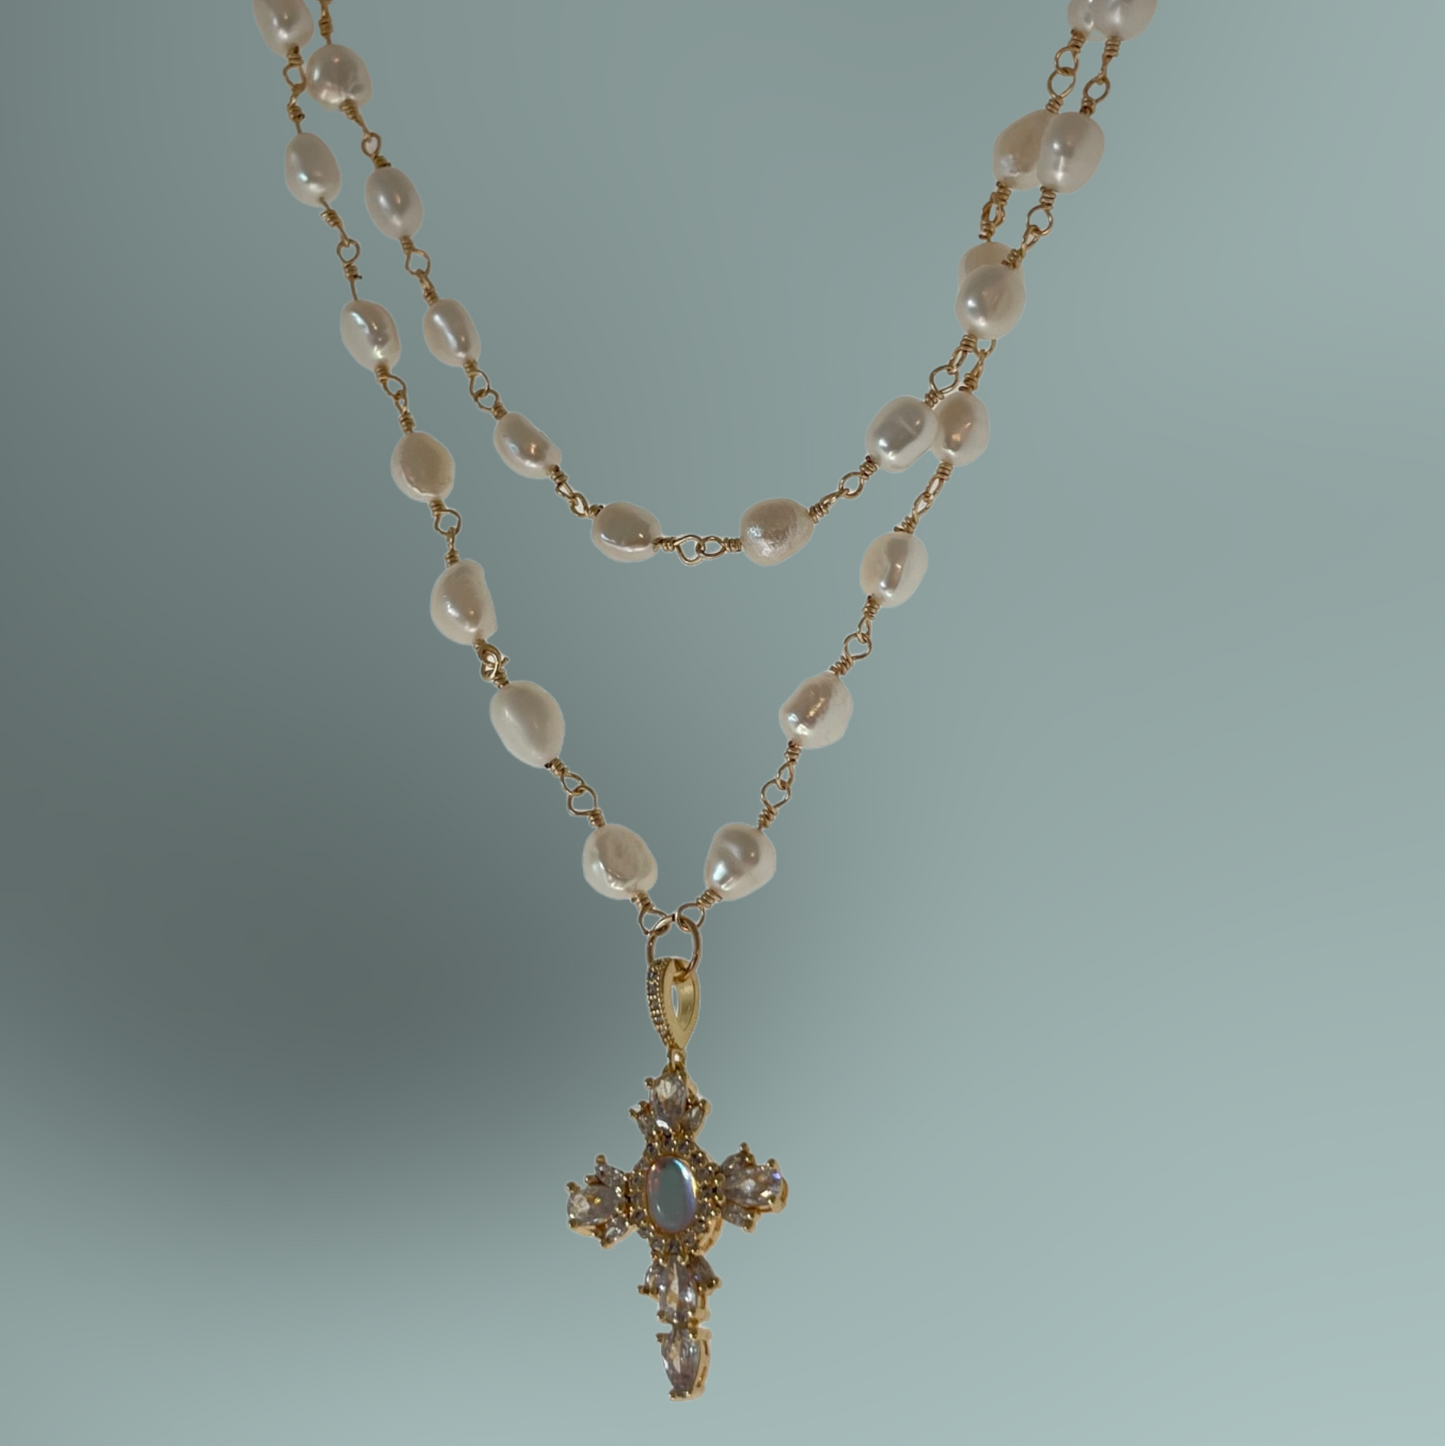 The Madonna Necklace